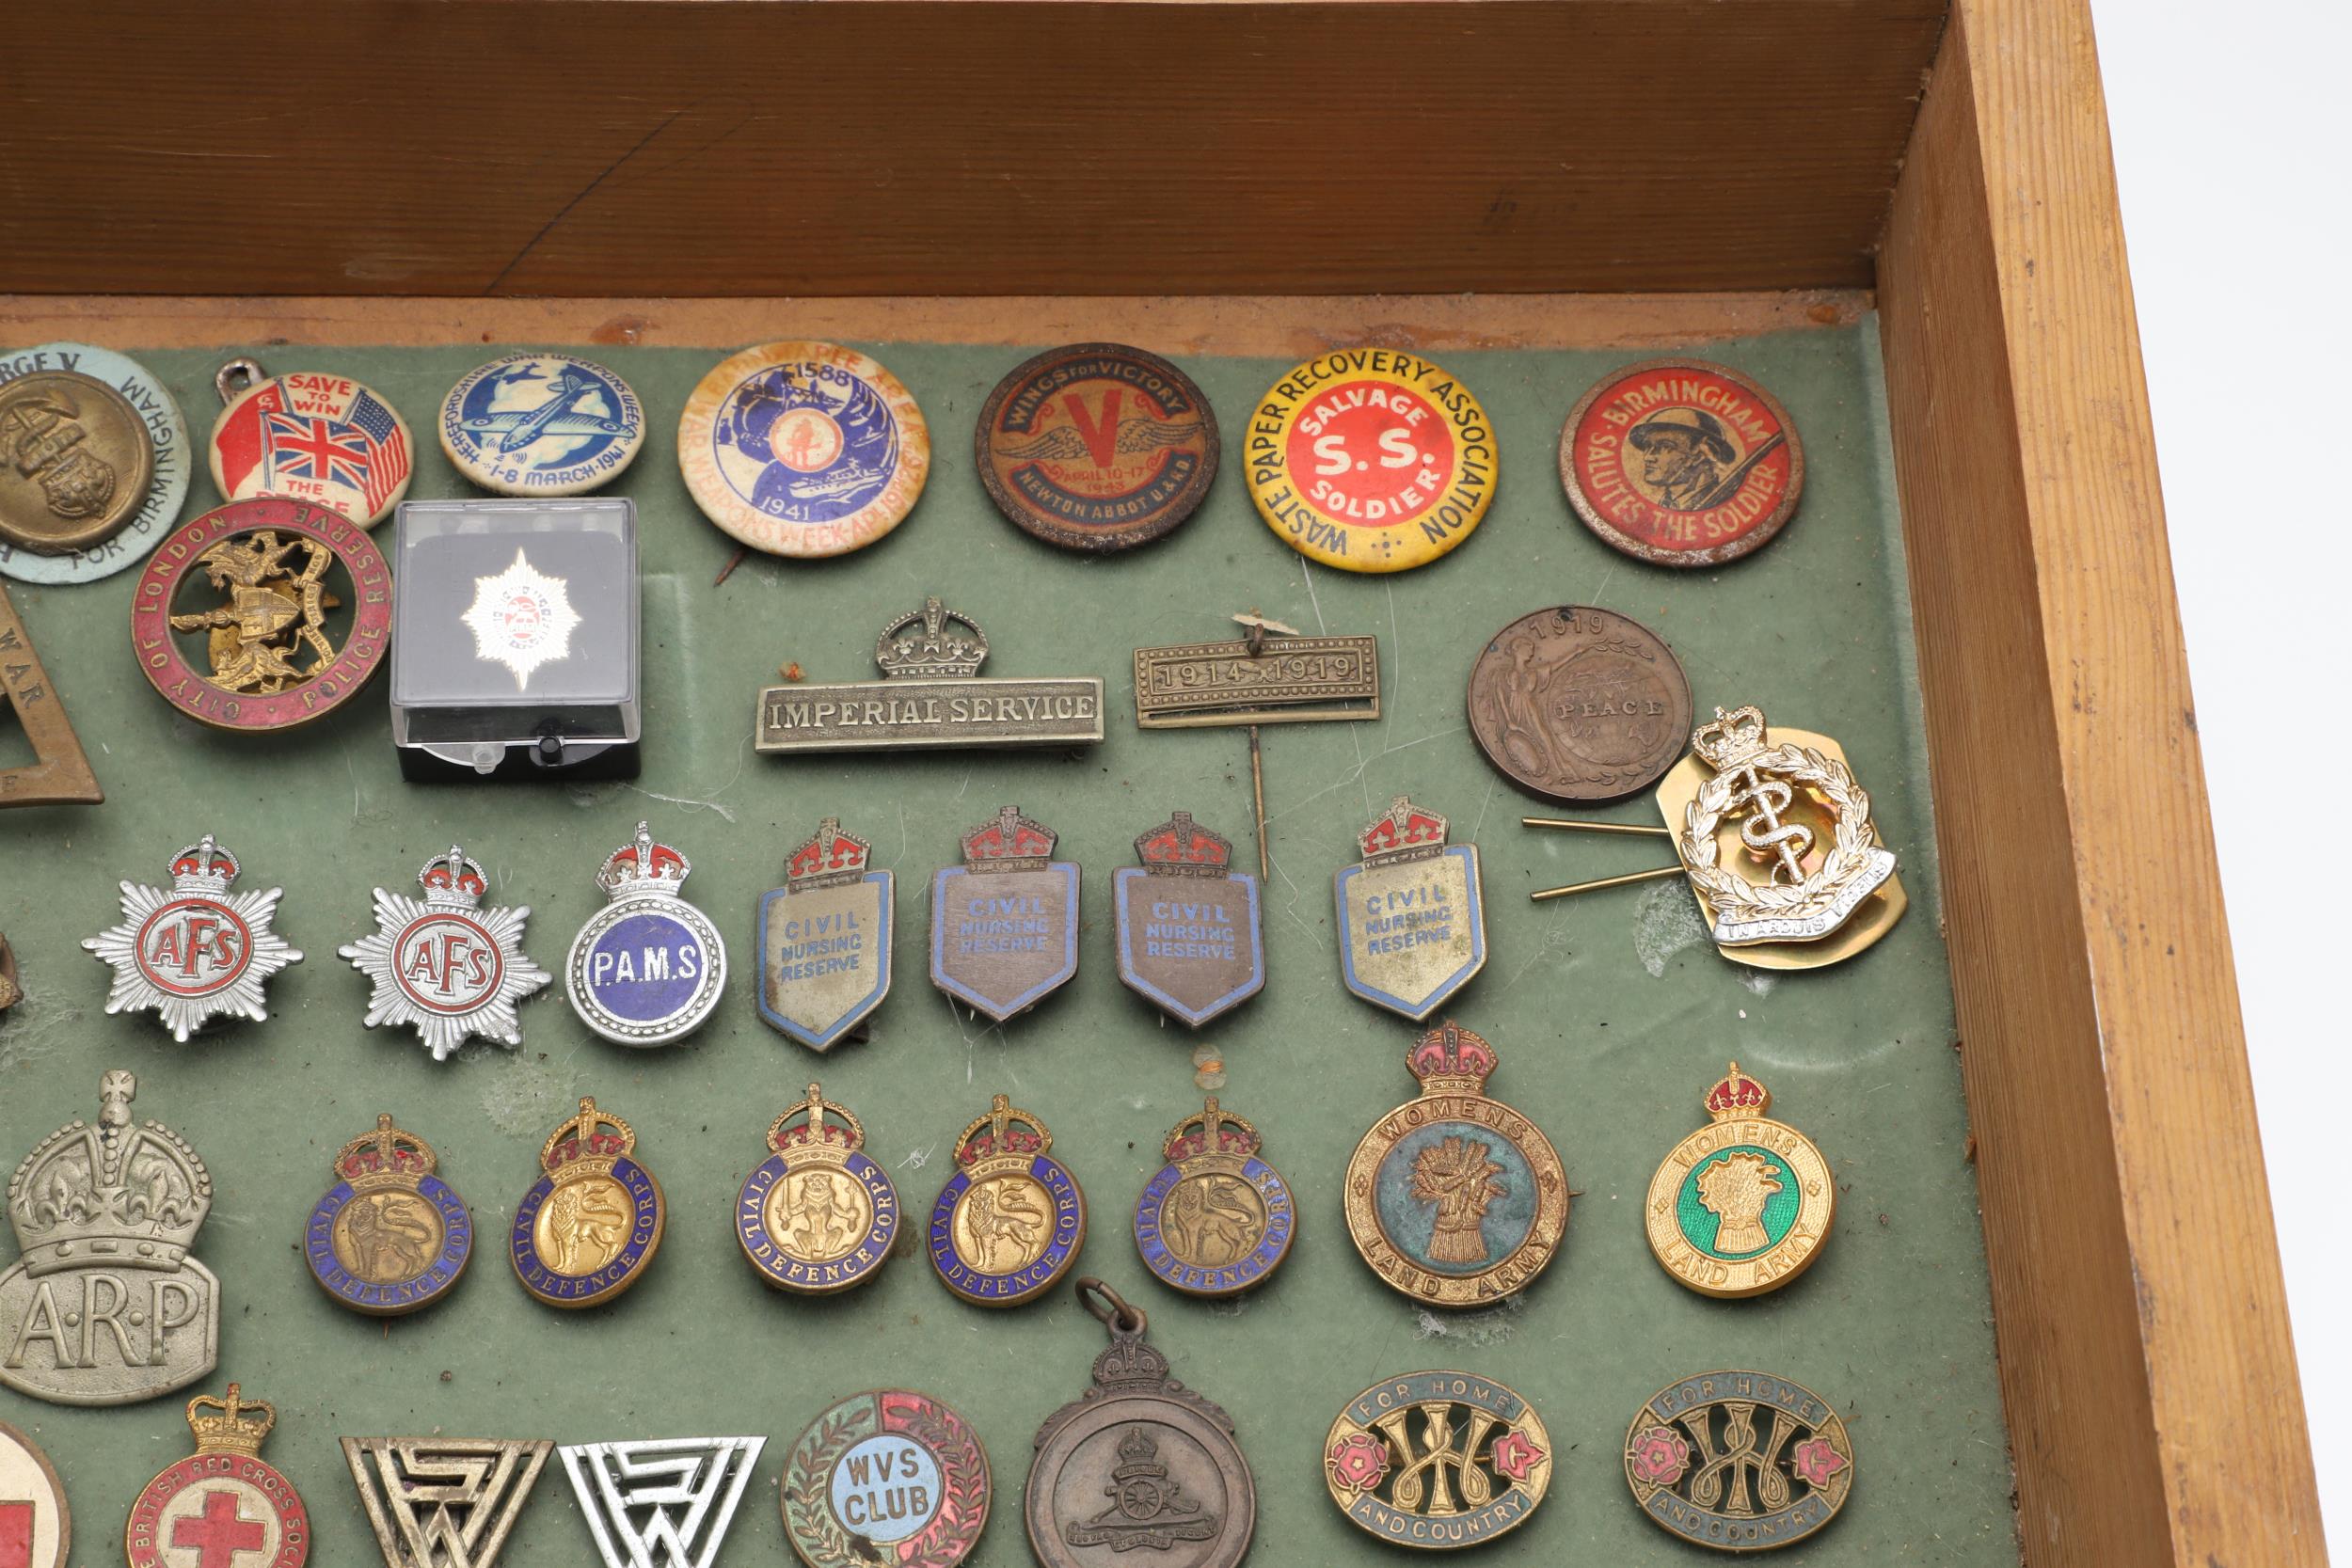 AN INTERESTING COLLECTION OF MILITARY RELATED ENAMEL AND SIMILAR BADGES. - Image 3 of 7